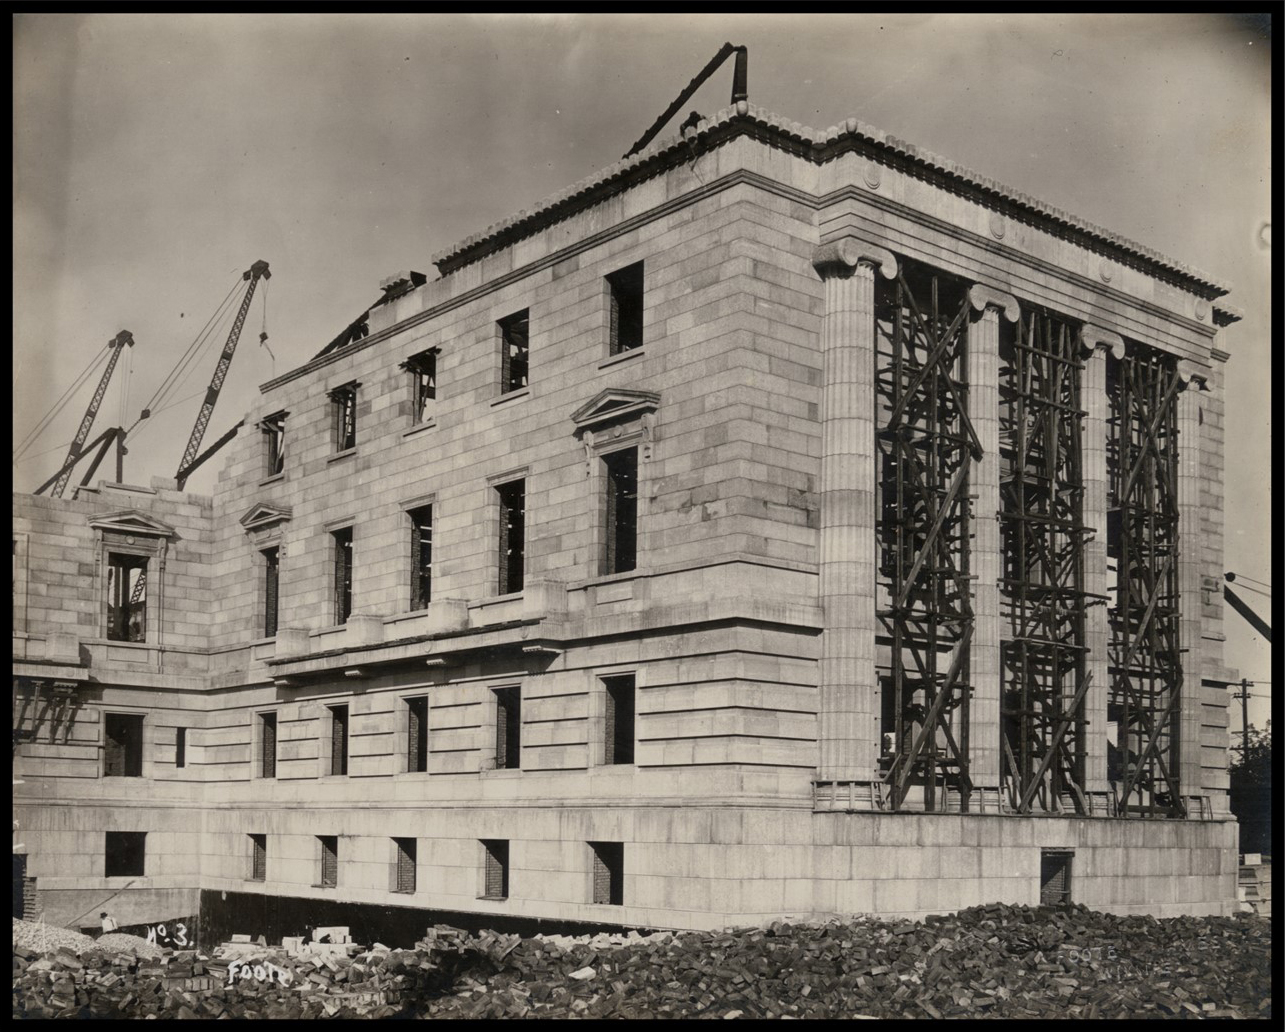 Photo of the exterior of an almost complete wall. There are no windows. There is scaffolding between the stone columns. In the background, giant cranes are visible through incomplete portions of the wall.